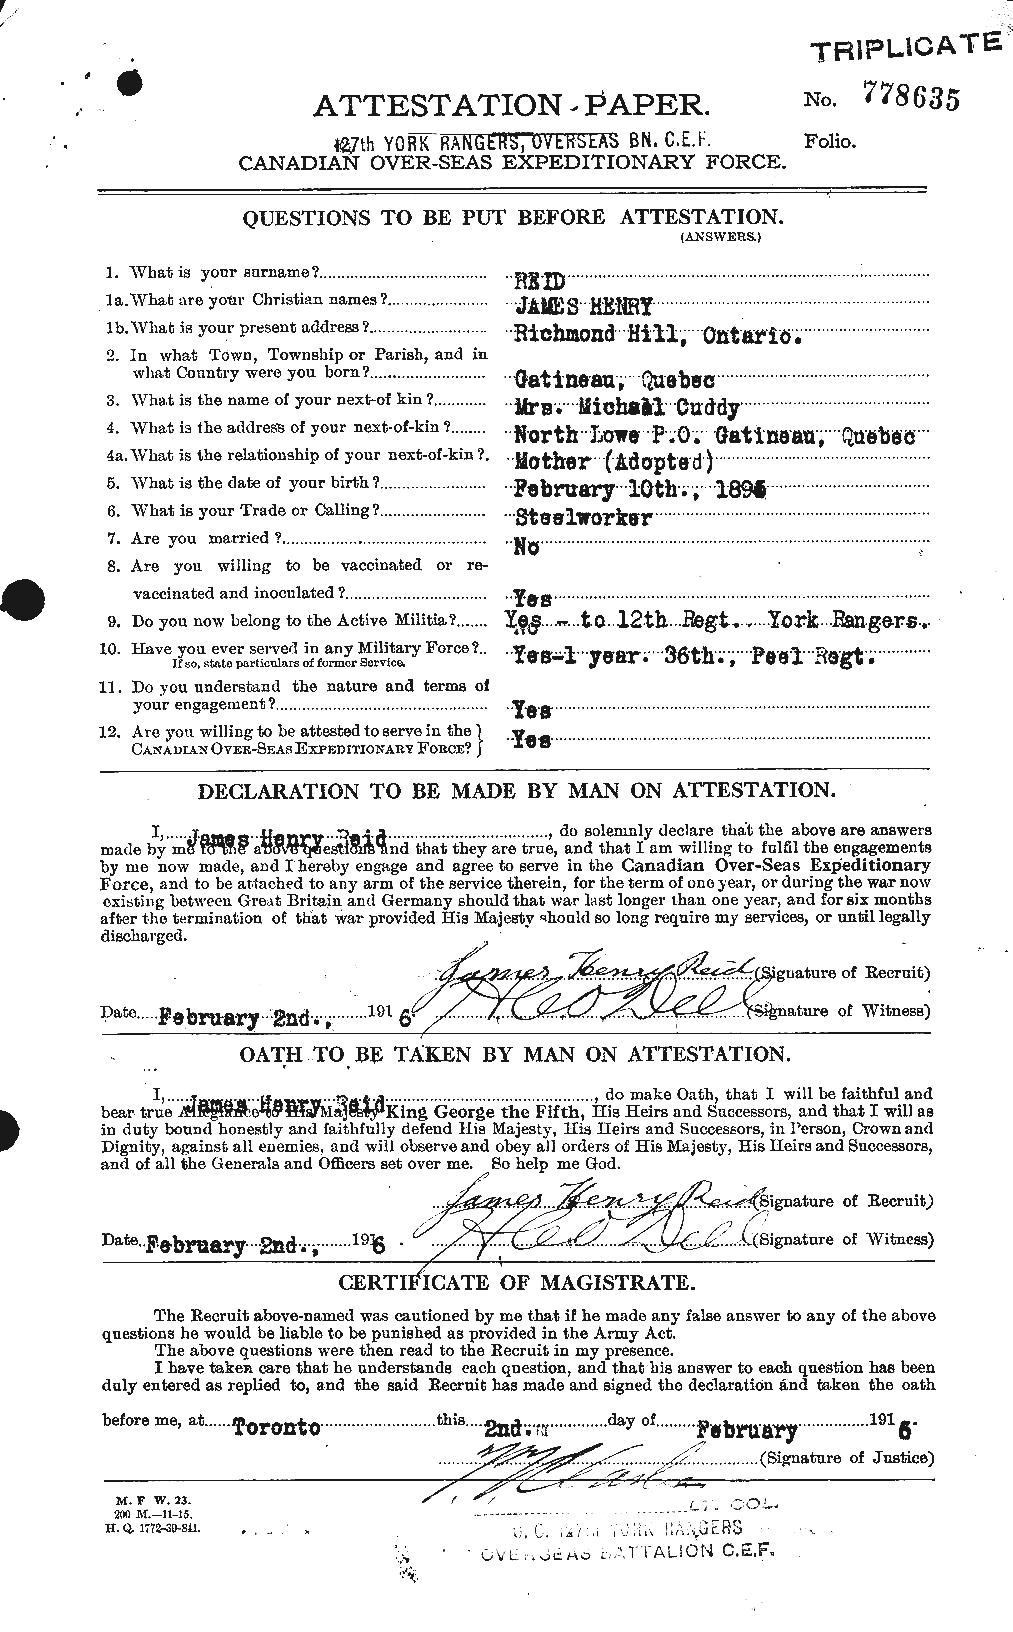 Personnel Records of the First World War - CEF 598717a